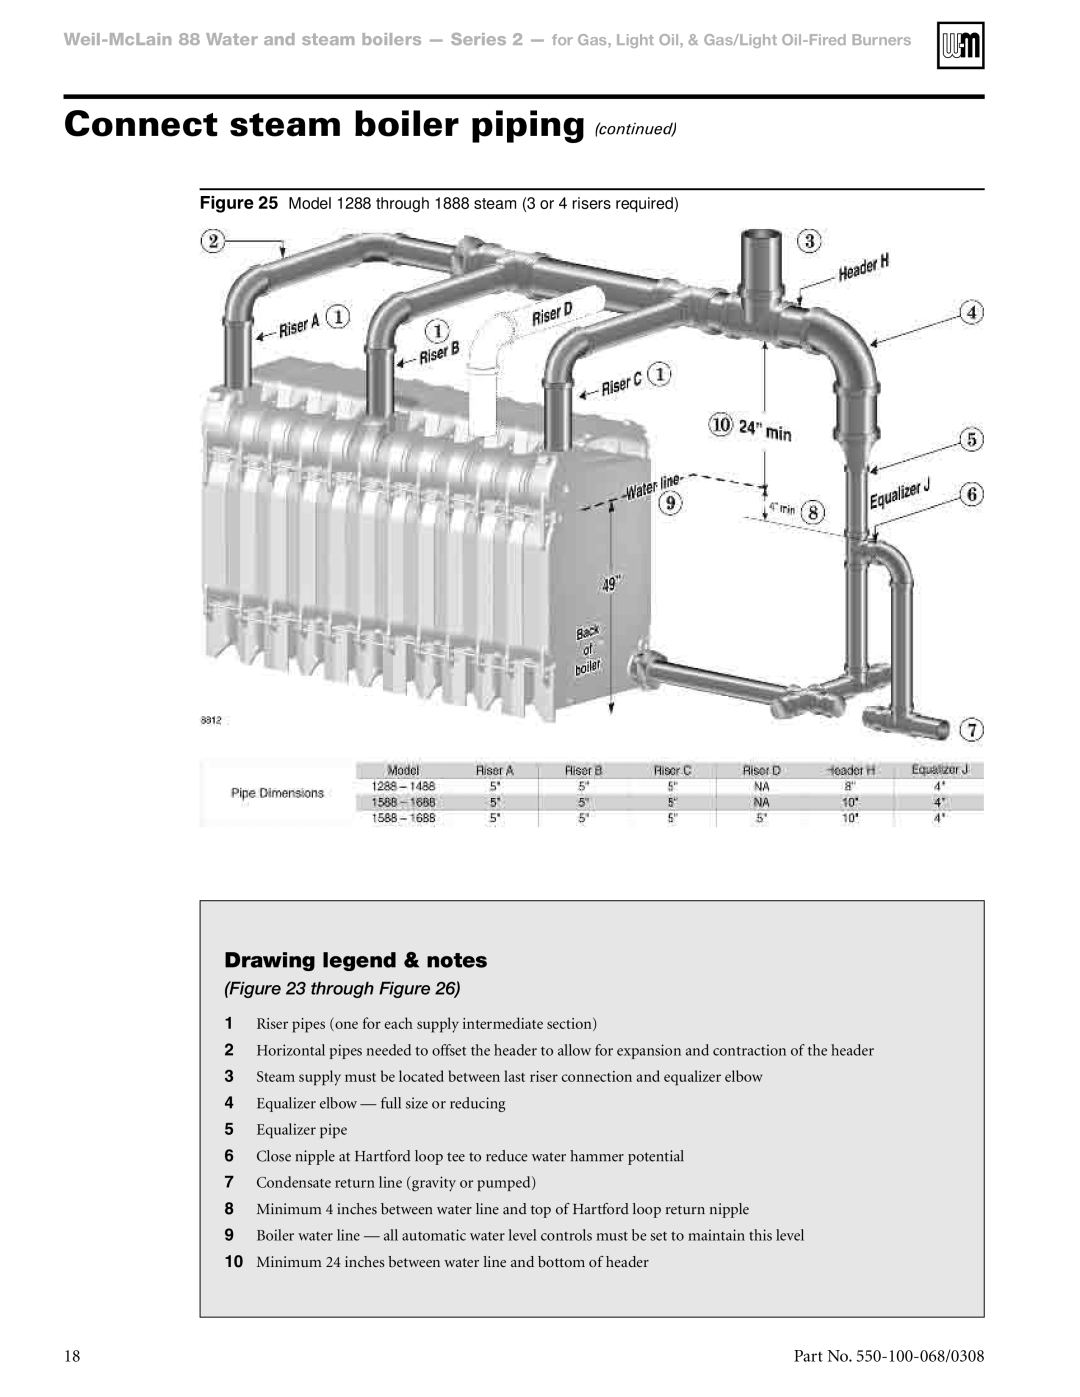 Weil-McLain 88 Connect steam boiler piping continued, Drawing legend & notes, through Figure, Part No. 550-100-068/0308 